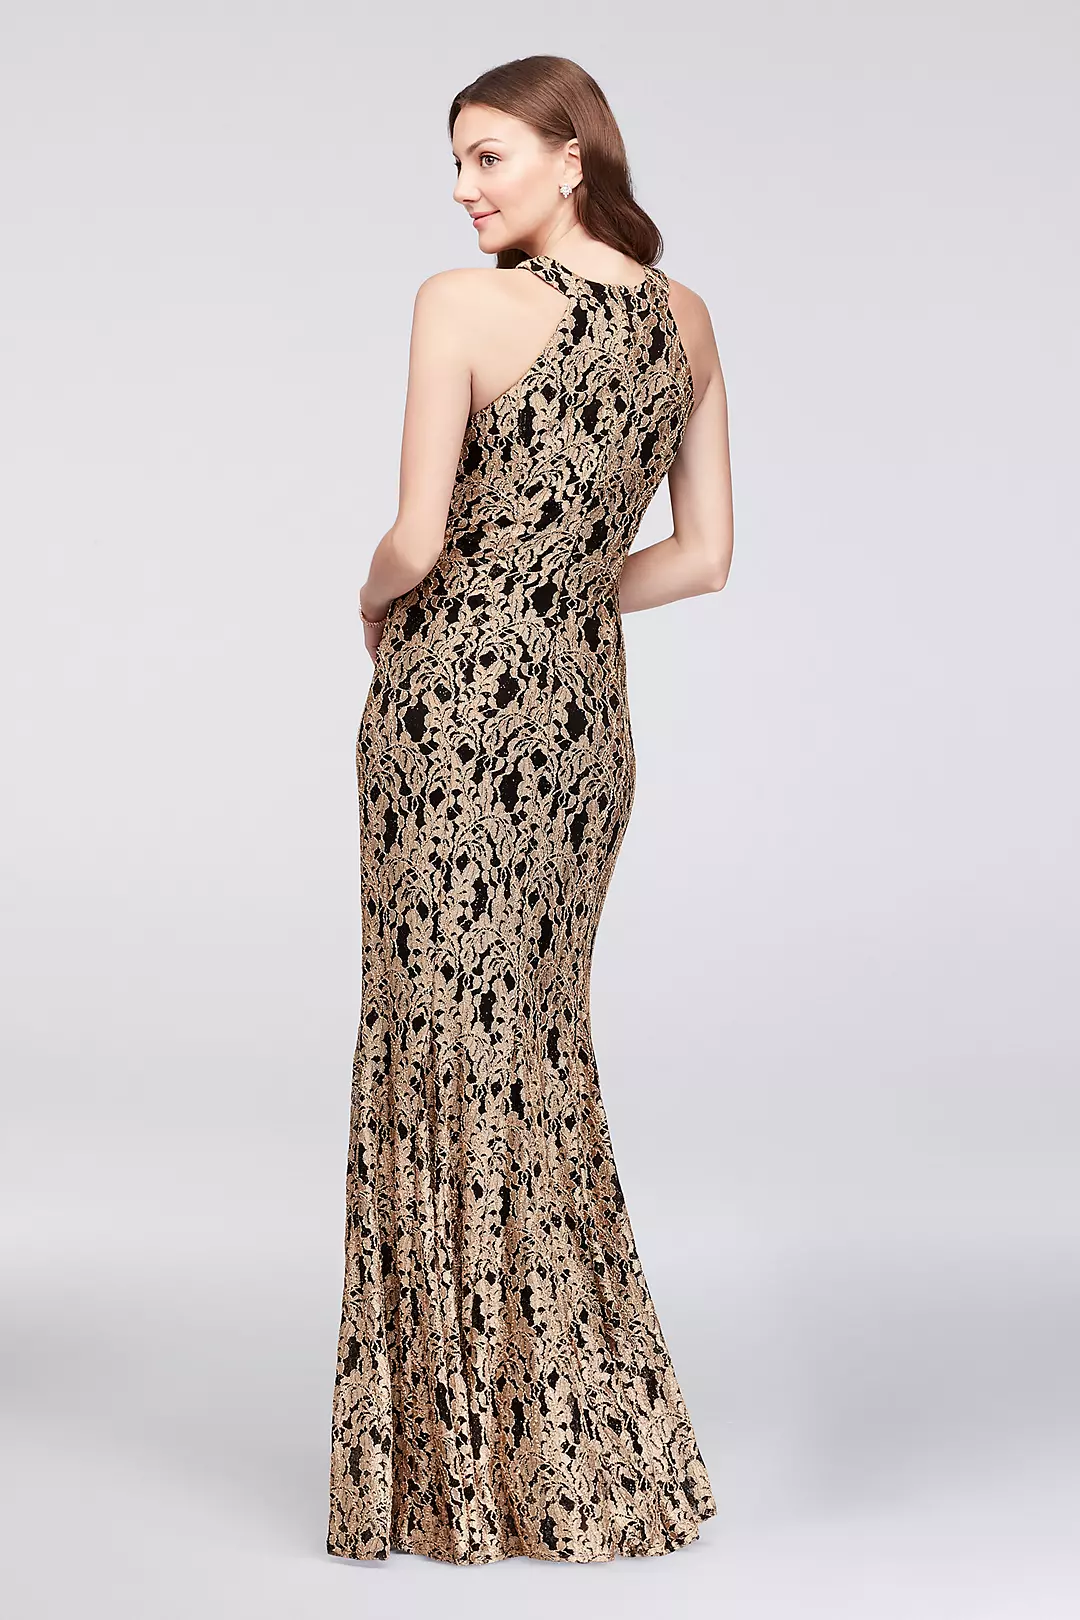 Gold Lace High-Neck Halter Mermaid Gown | David's Bridal